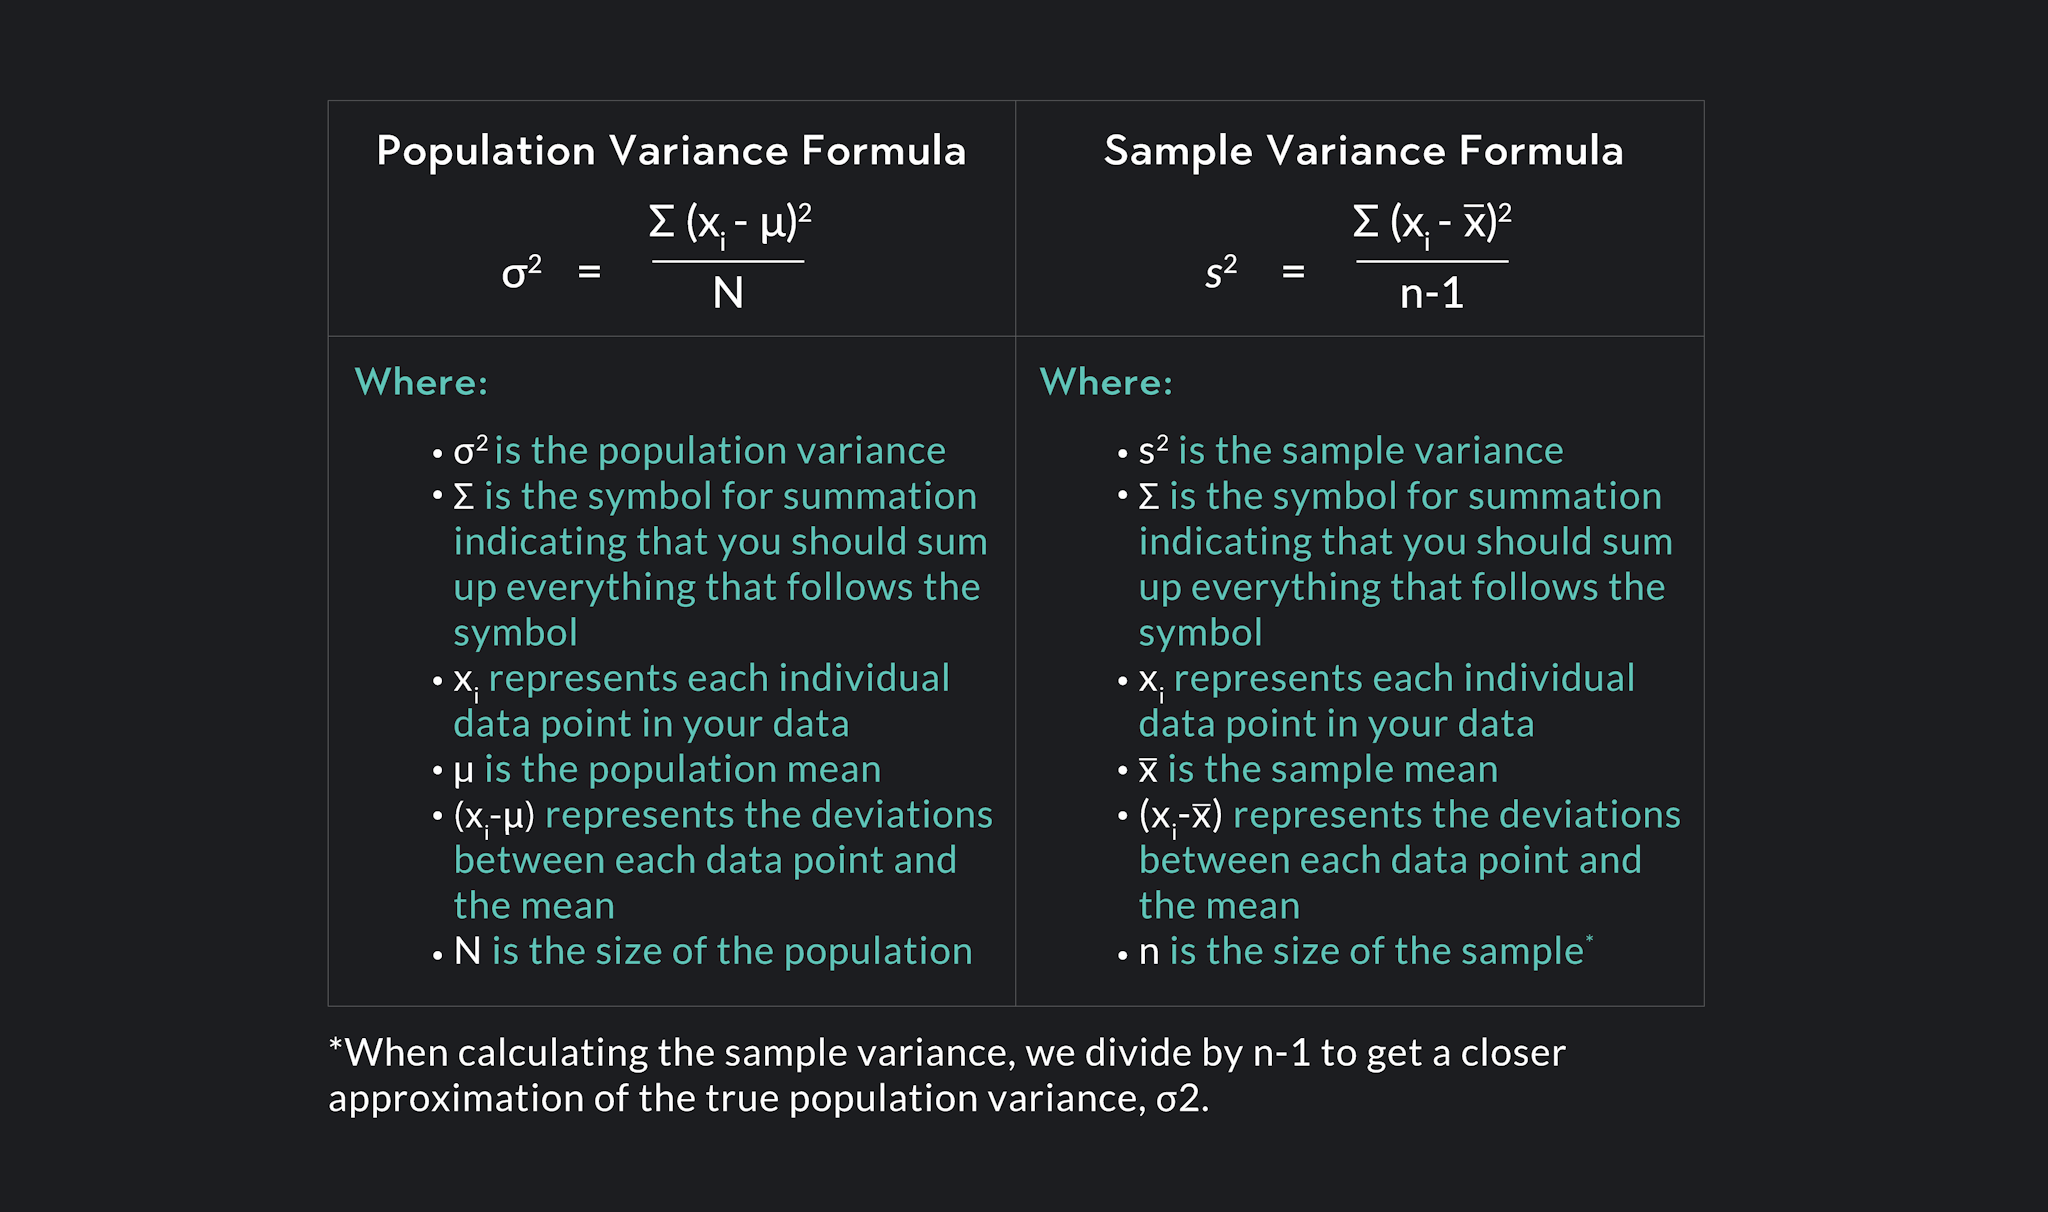 Table showing popular variance formula vs sample variance formula and with symbol definitions for each